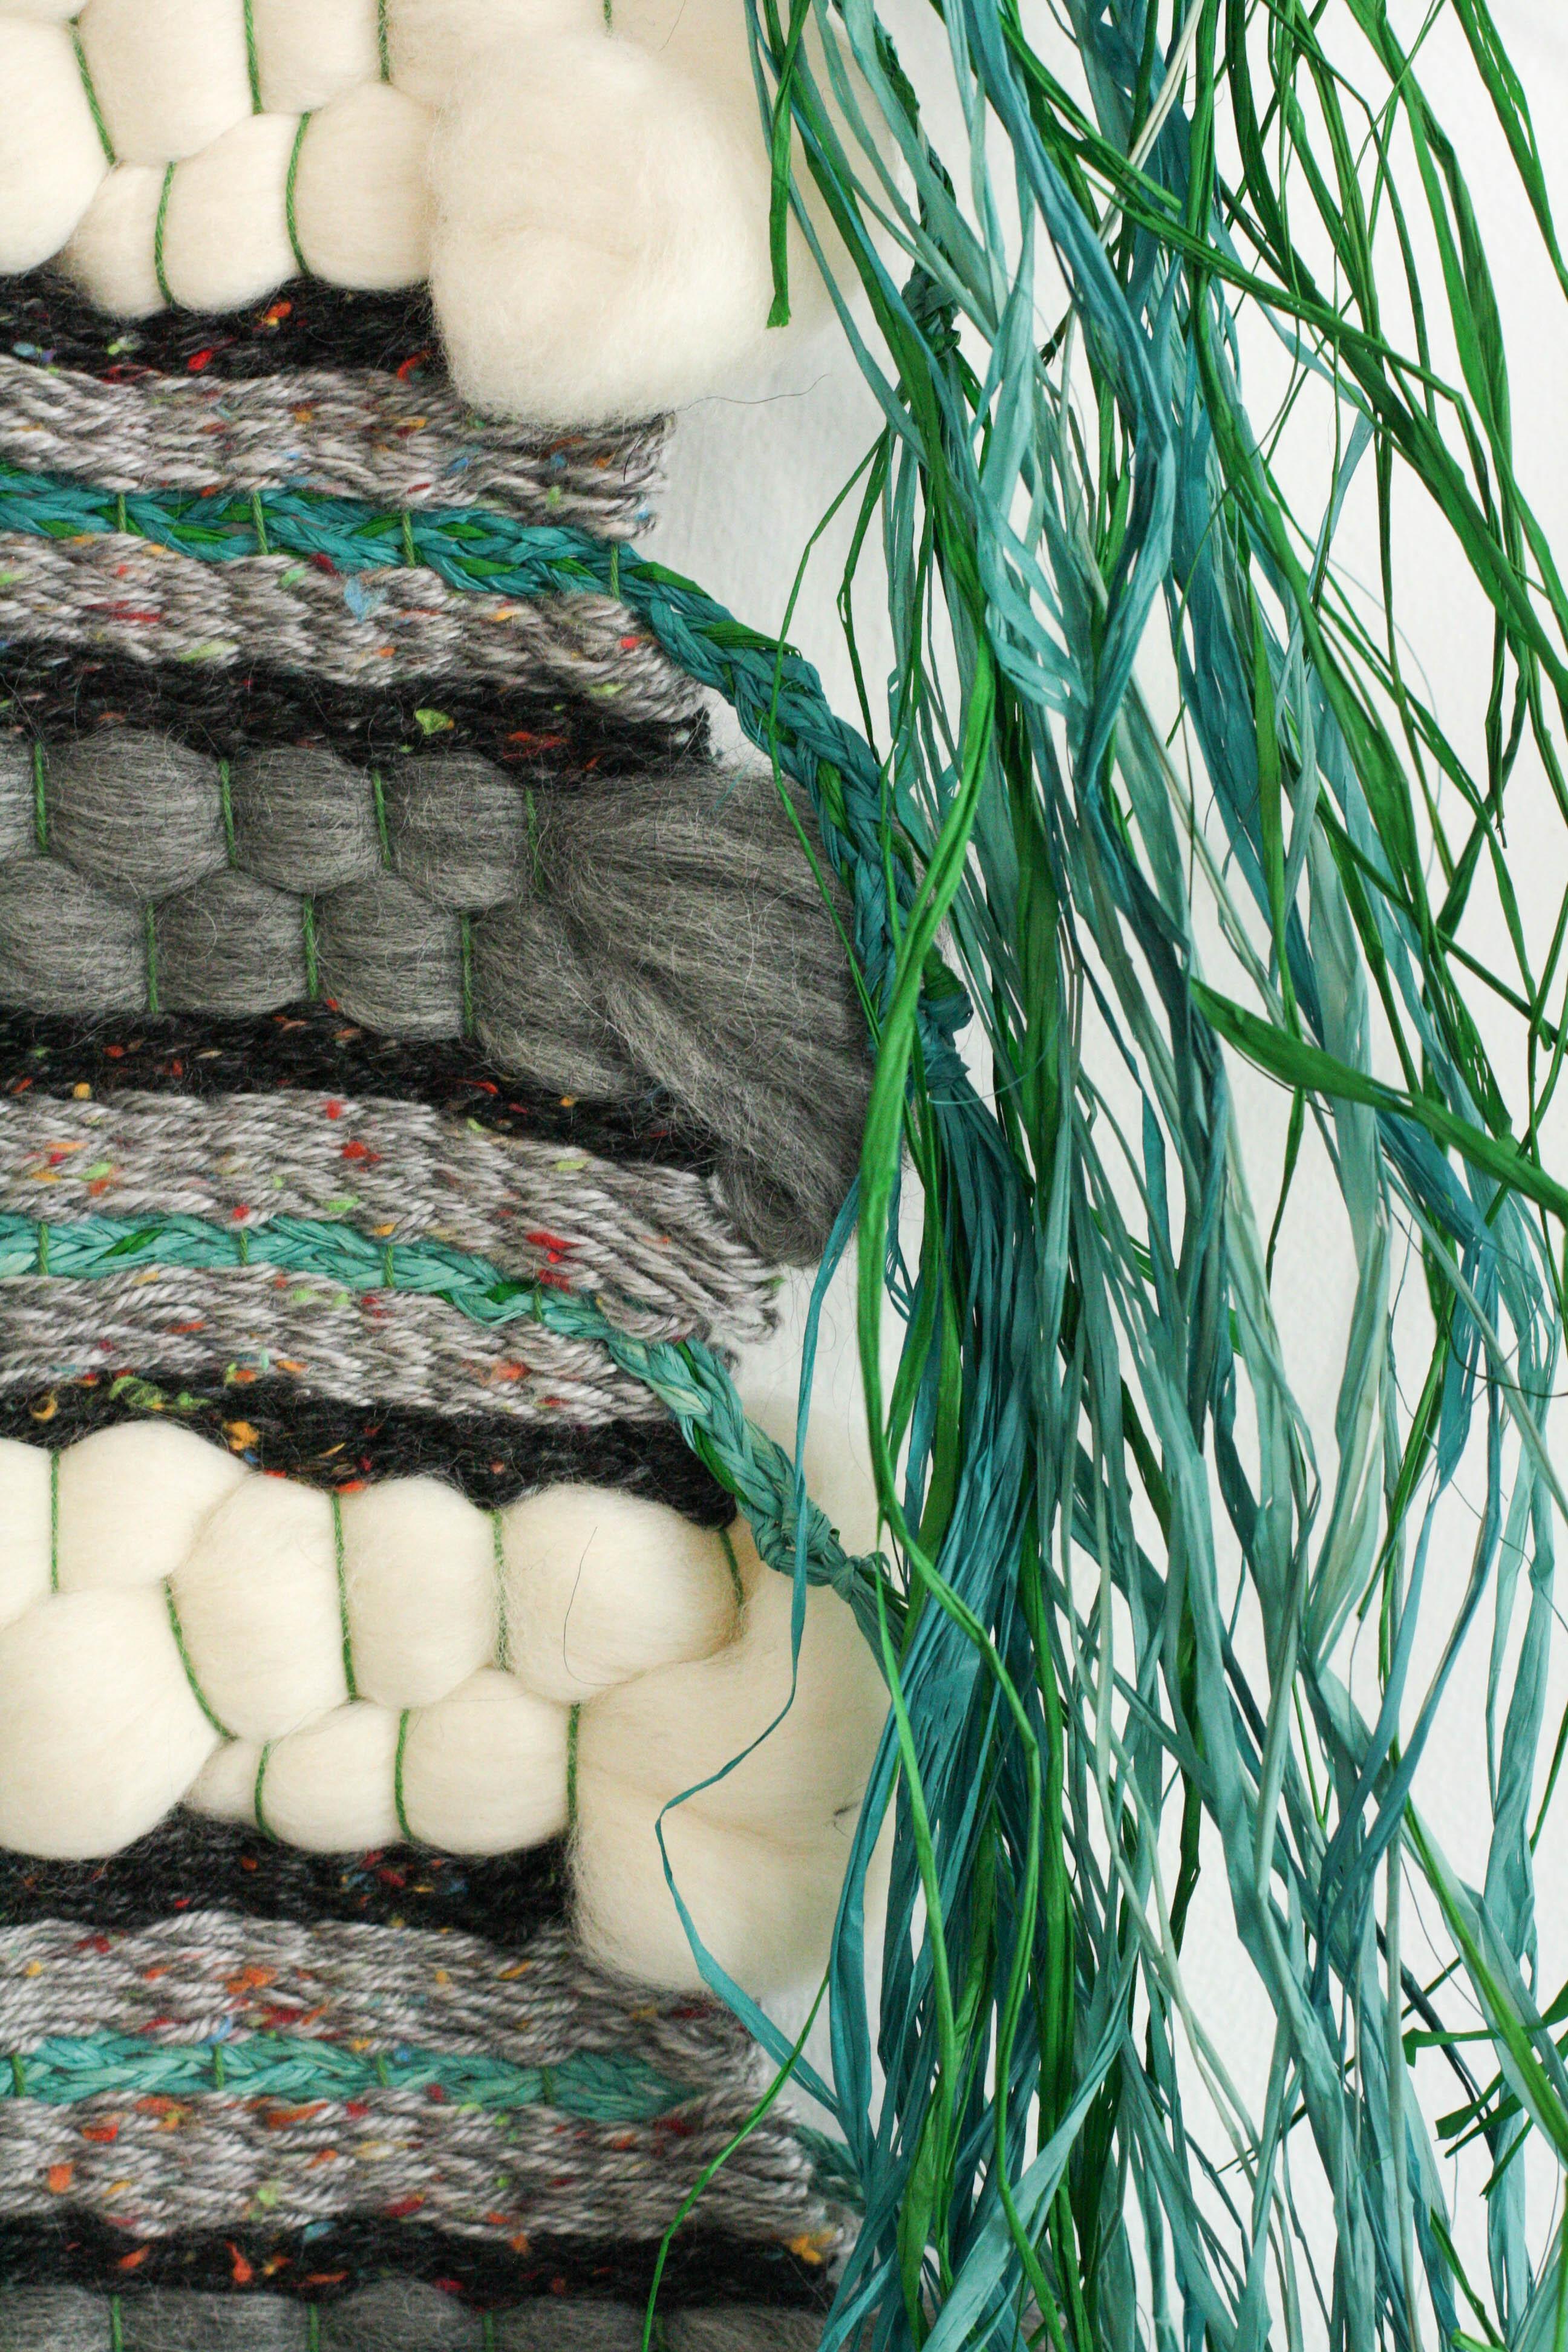 Textural, soft, and vibrant woven sculpture using raffia, roving, and cotton.

Artist Statement:
